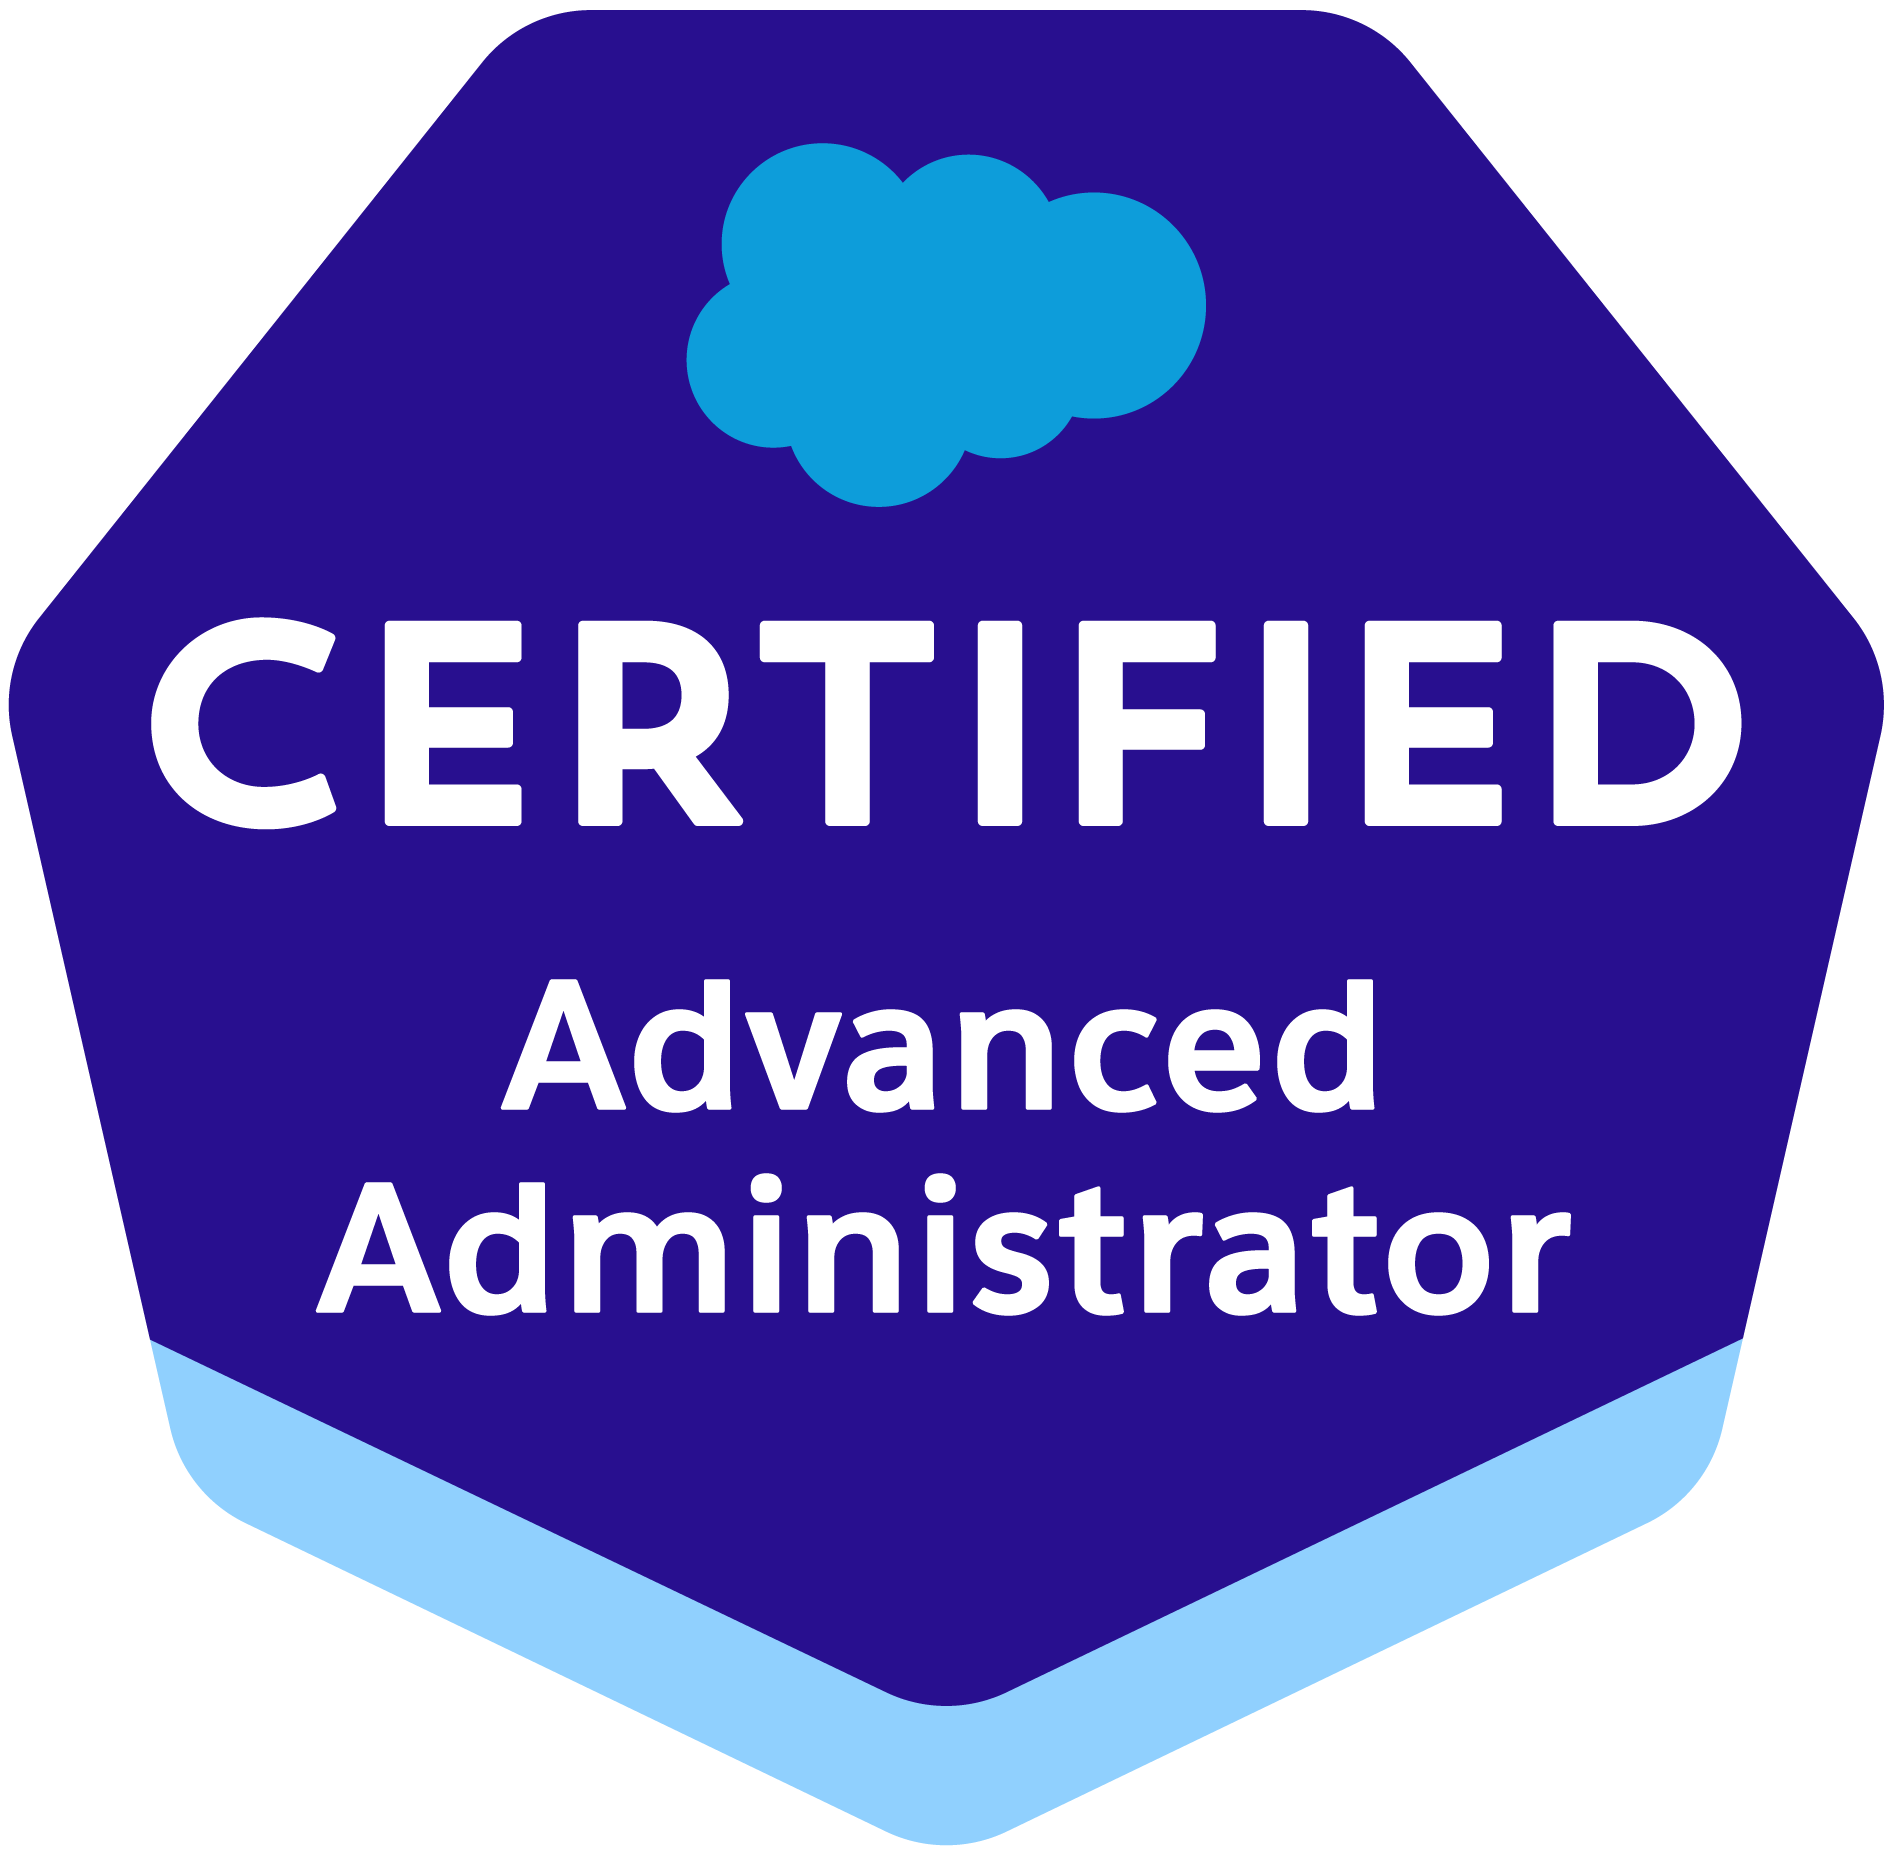 AMDIS certificated as Salesforce Advanced Administrator